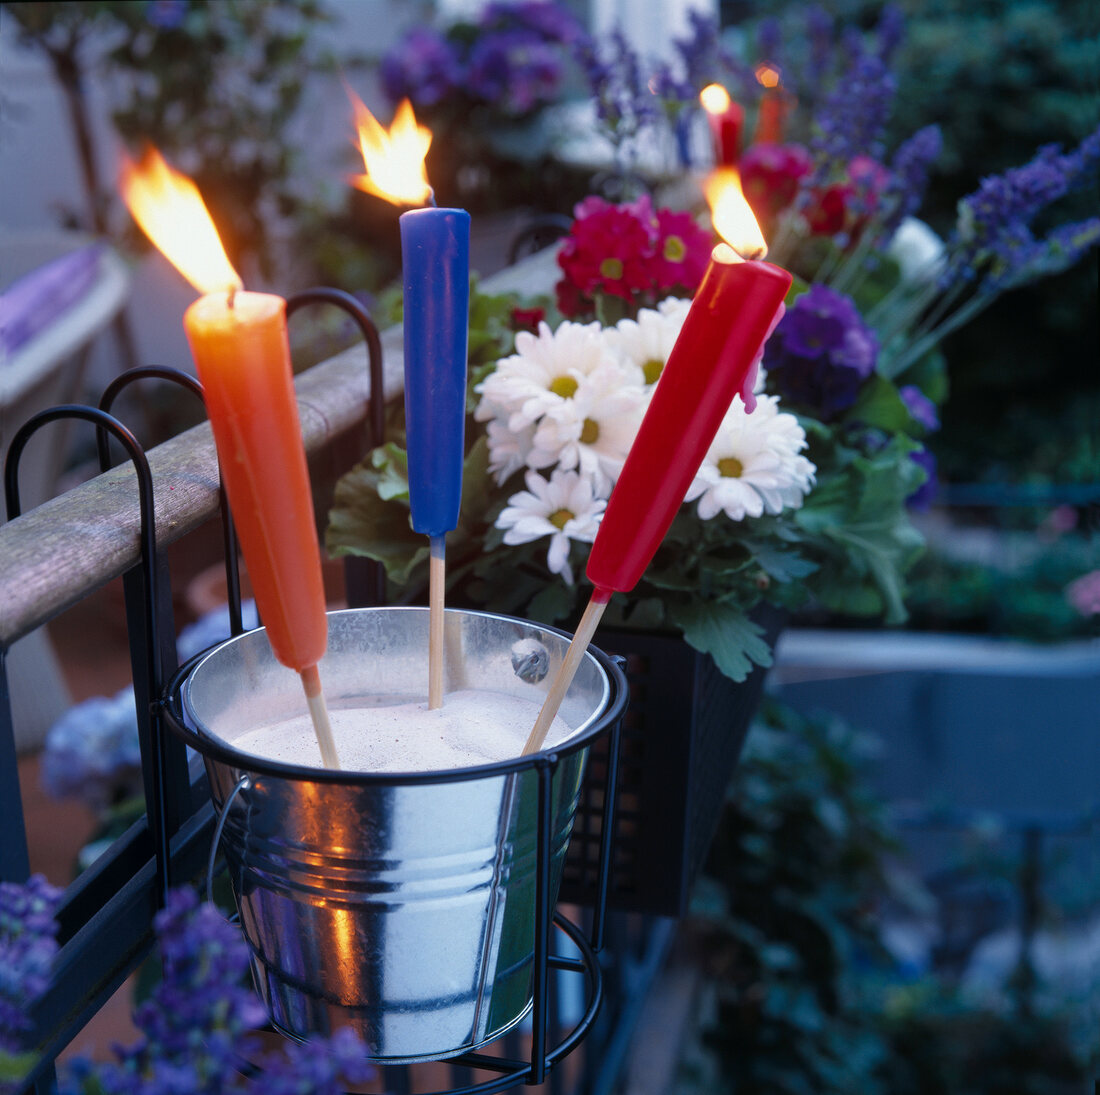 Lit wax torches with wooden handle in garden at evening with flowers in background